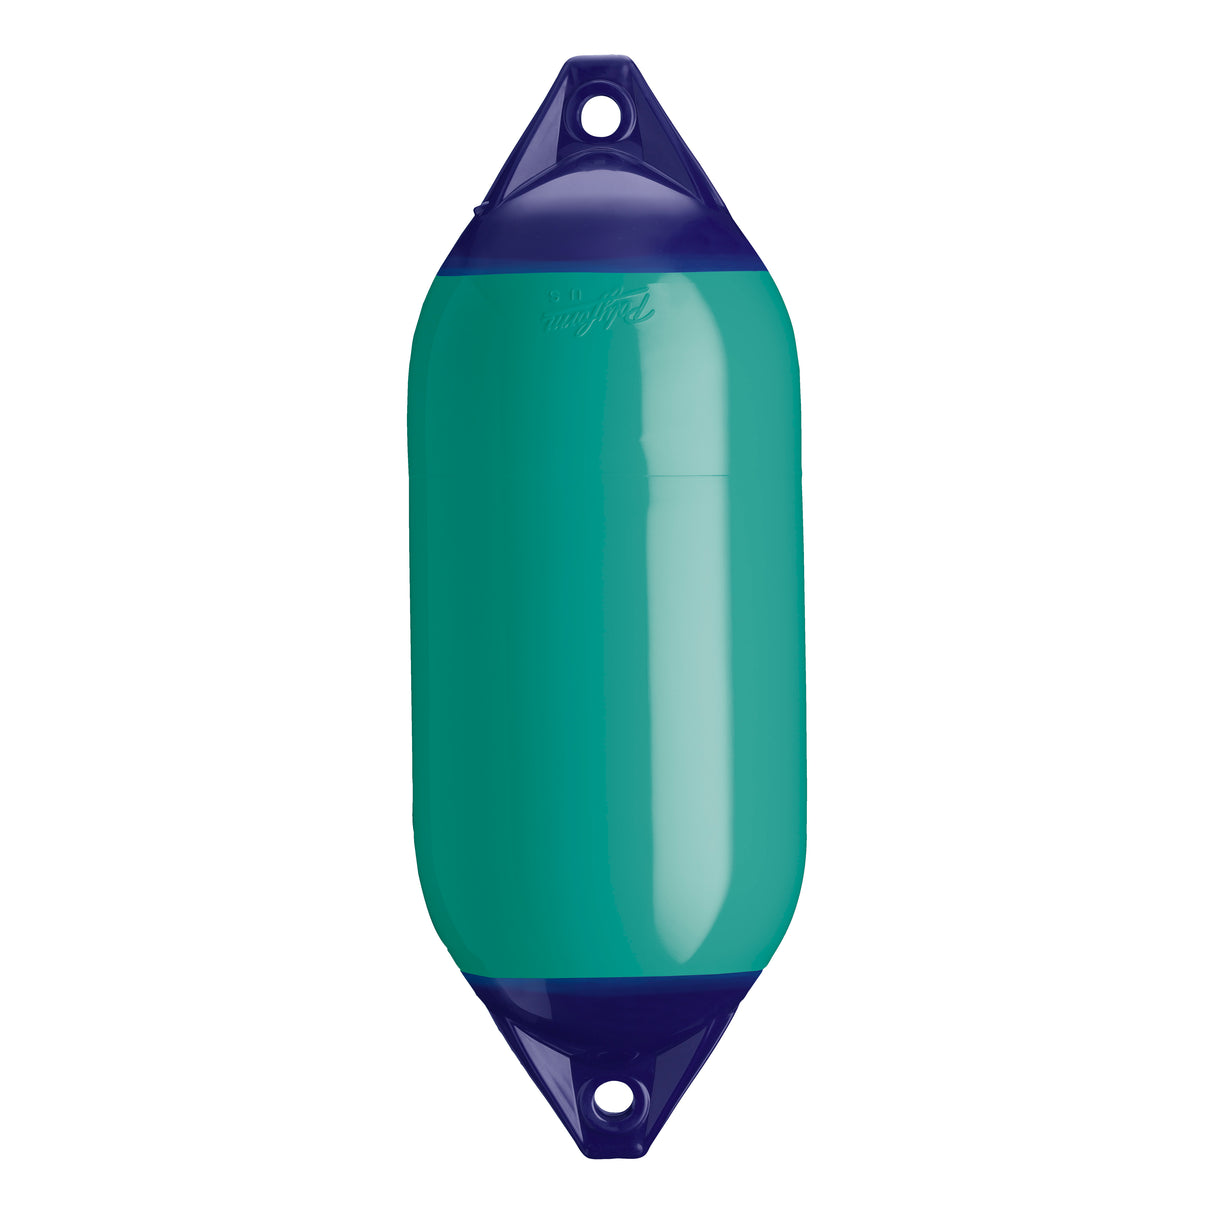 Teal boat fender with Navy-Top, Polyform F-5 